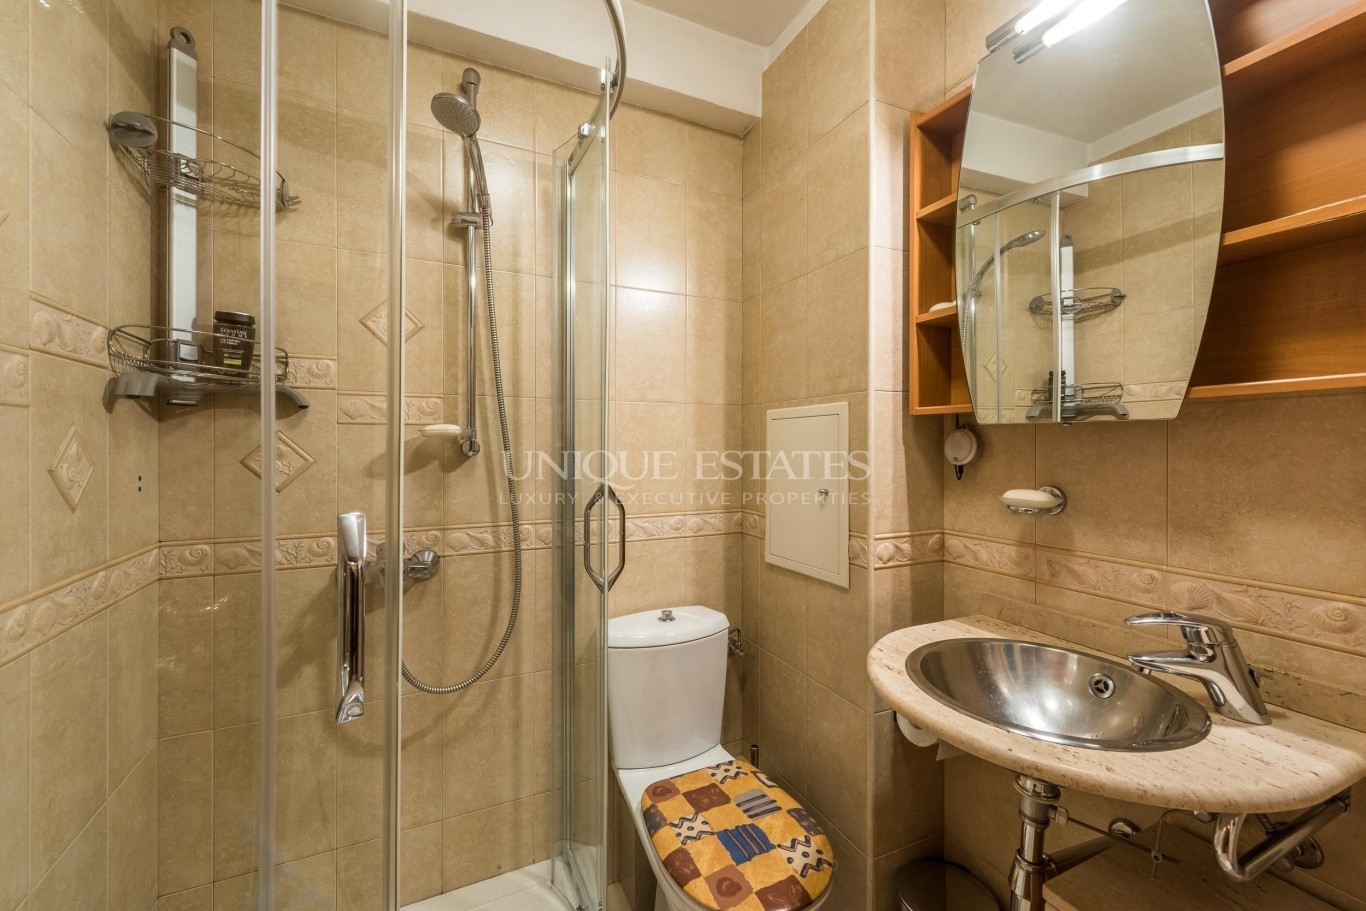 Apartment for sale in Sofia, Ivan Vazov with listing ID: K8929 - image 8